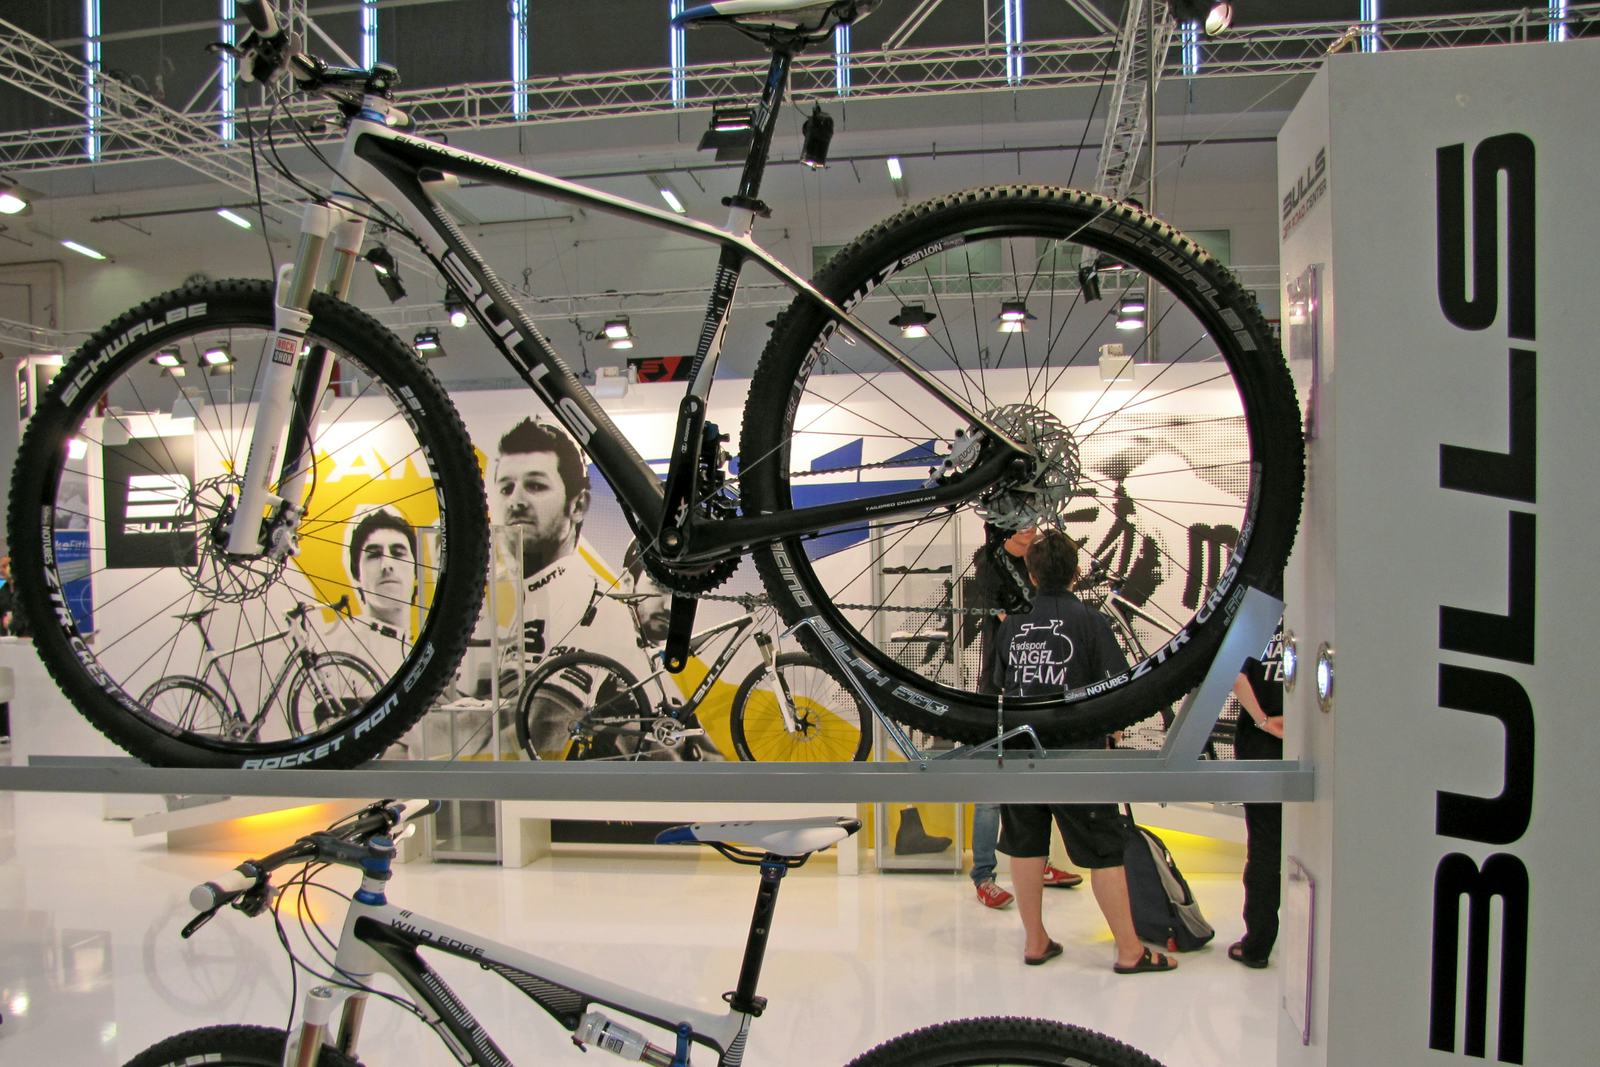 ZEG’s Bulls brand will be highlighted at the dealer cooperative’s Eurobike booth. – Photo Bike Europe